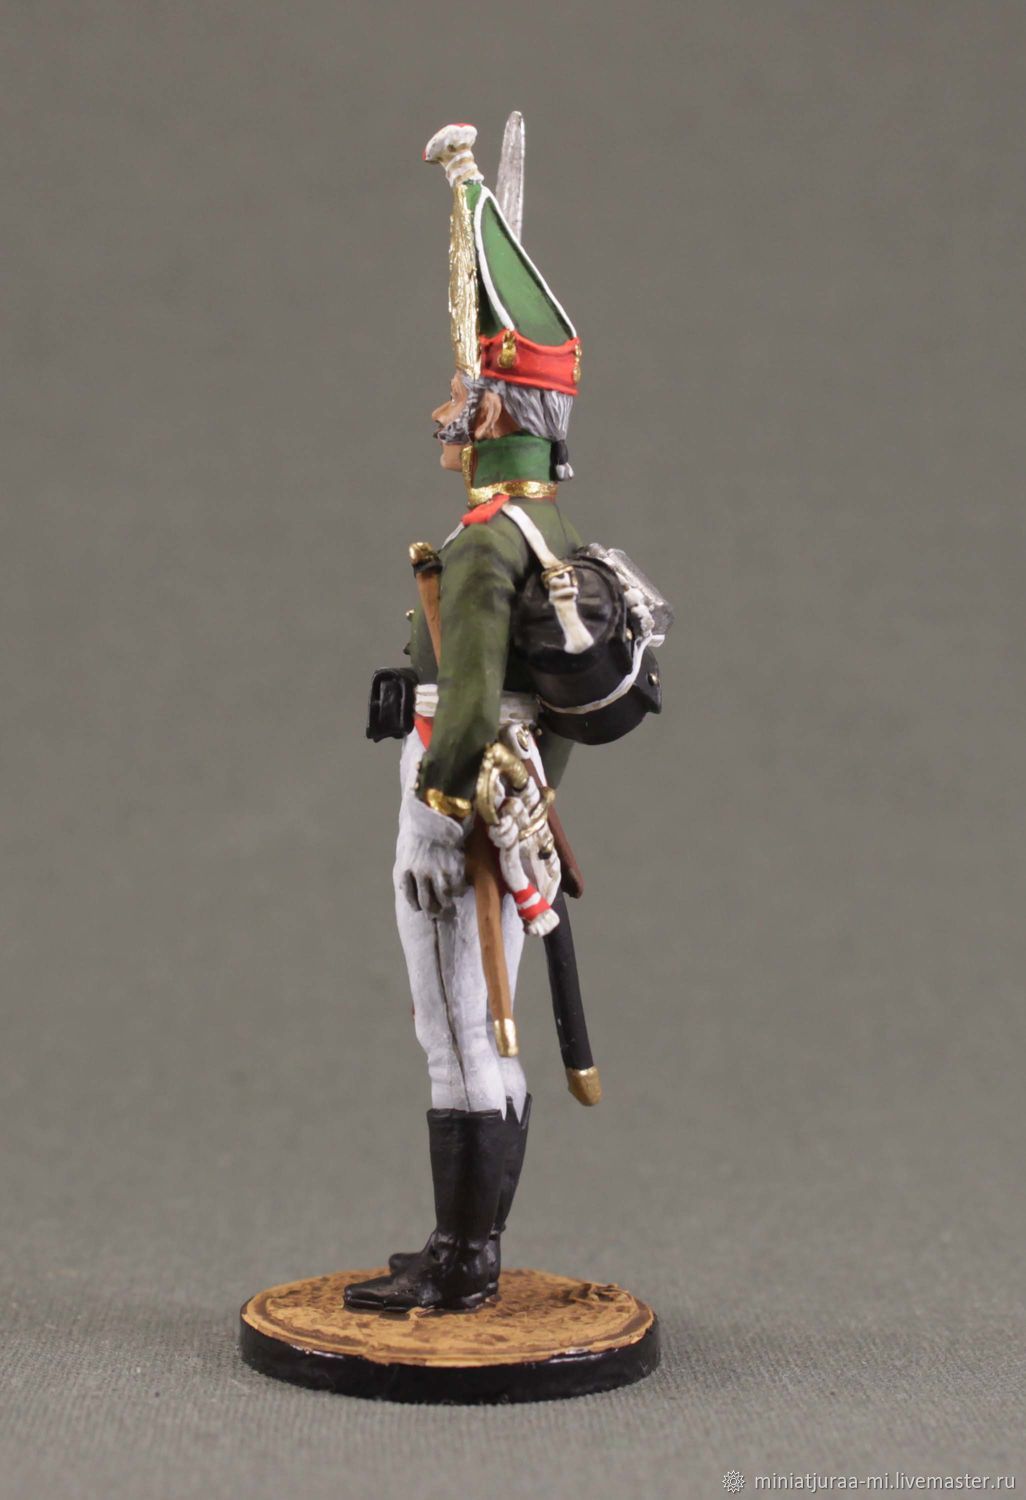 Details about   Tin toy soldier 54 mm.Superb Elite Luxury painting in St.Petersburg.Napoleon 